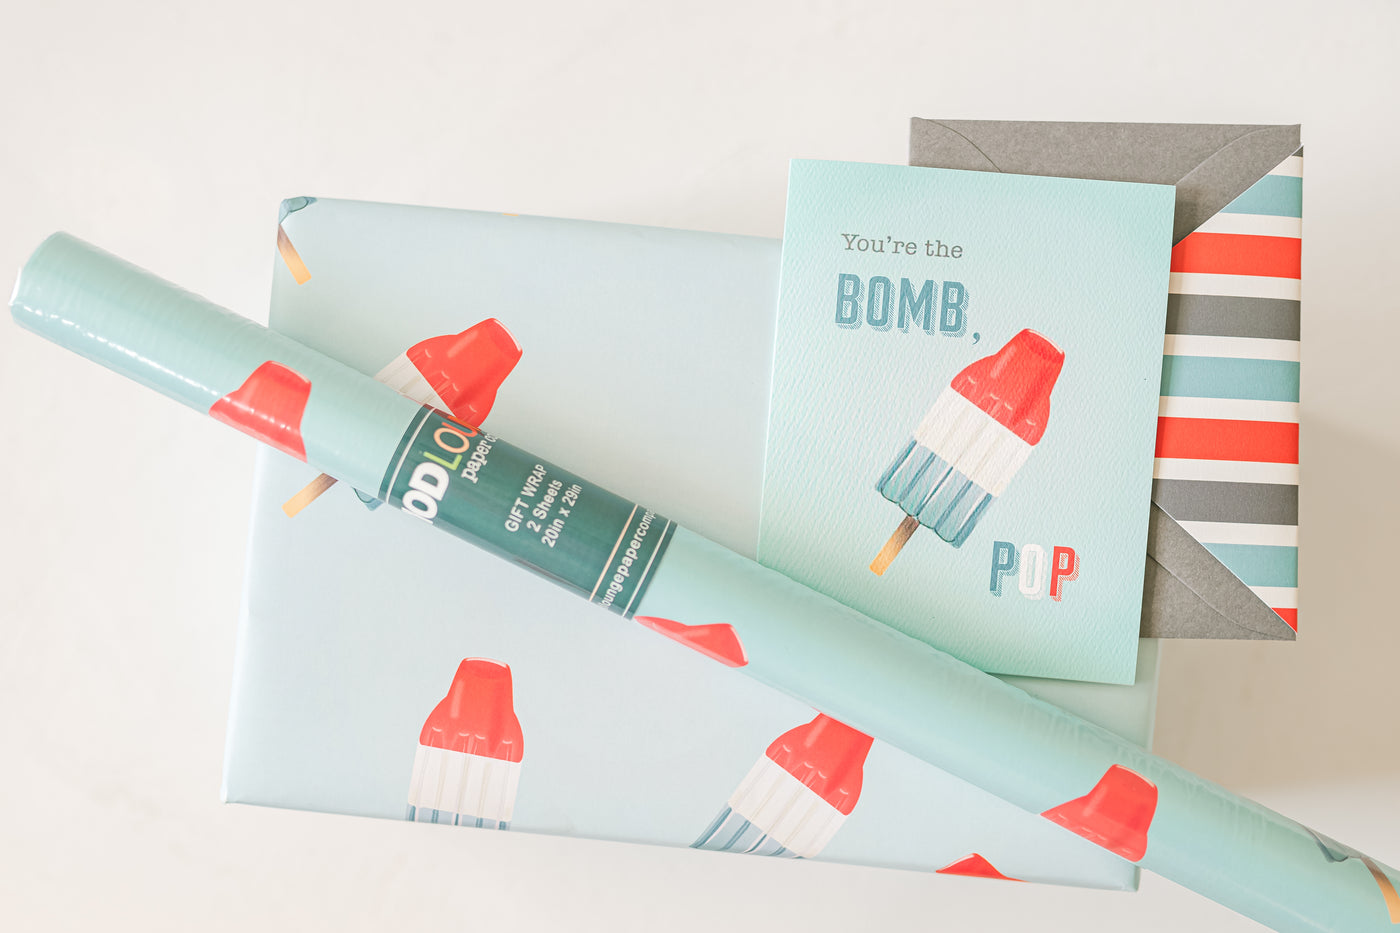 Bomb Pop Gift Wrap for fathers day or dads birthday